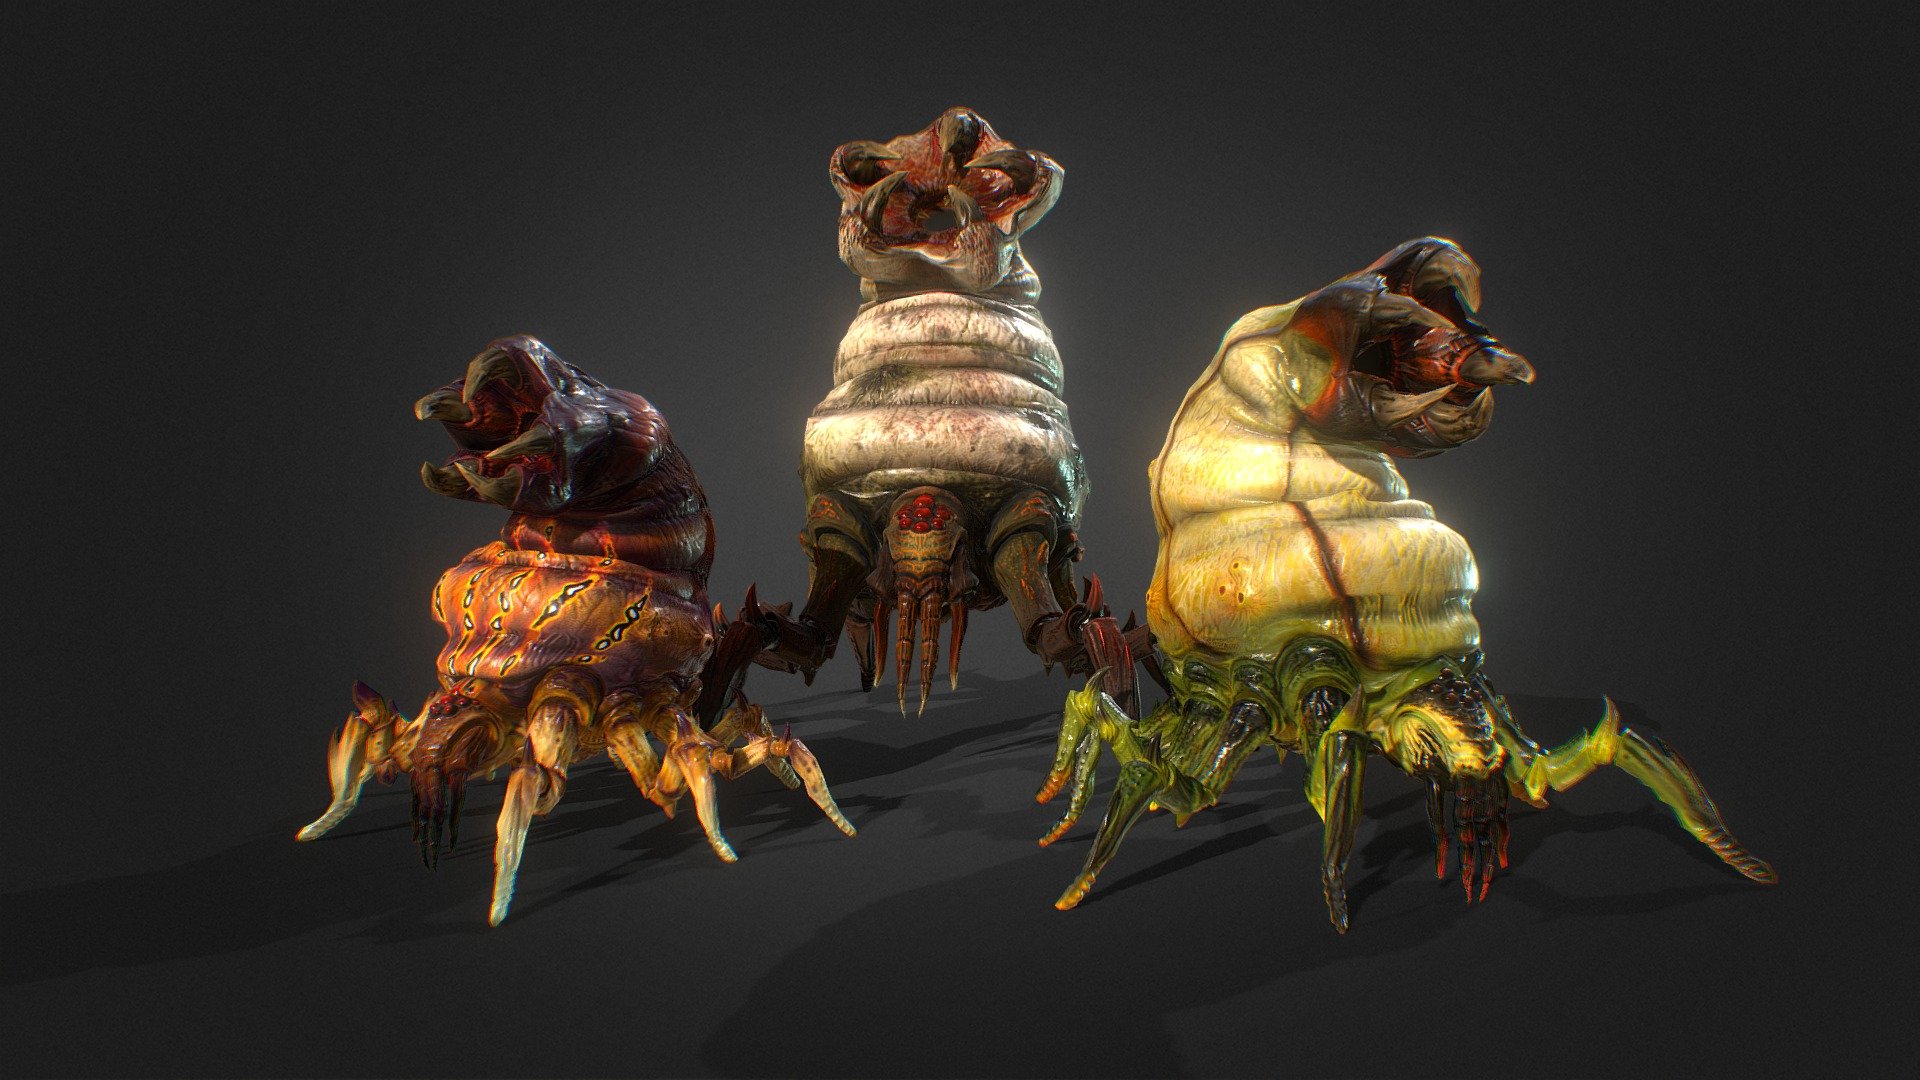 Insect beaast 3 preview - Insect beaast 3 preview - 3D model by Dmitriy Dryzhak (@arvart.lit) 3d model